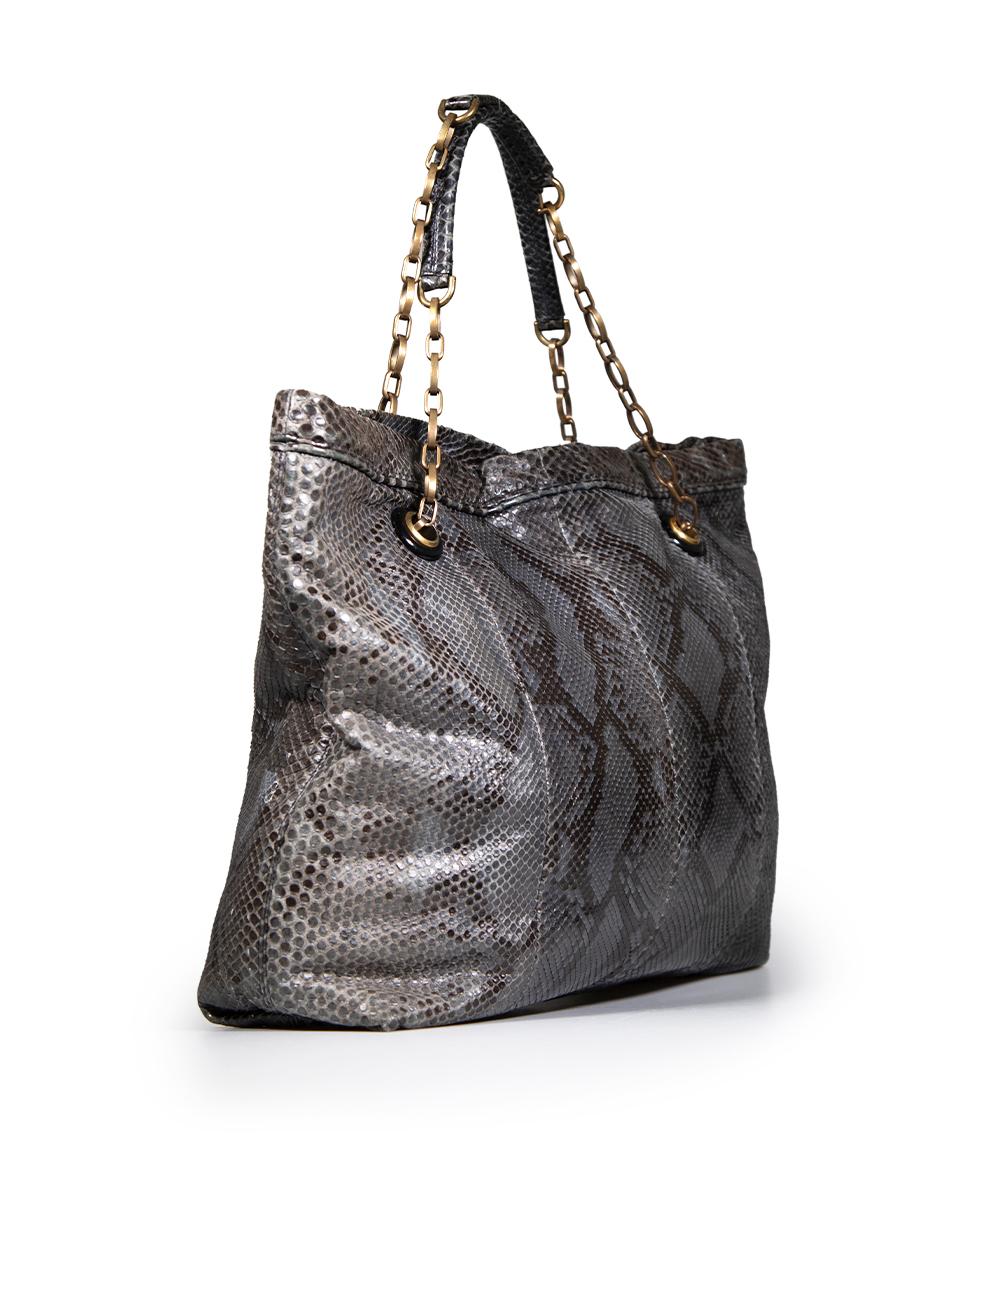 CONDITION is Very good. Minimal wear to bag is evident. Minimal wear to the front-left with white marks to the snakeskin. The chain handle hardware also shows signs of tarnishing on this used Lanvin designer resale item.
 
 Details
 Happy
 Grey
